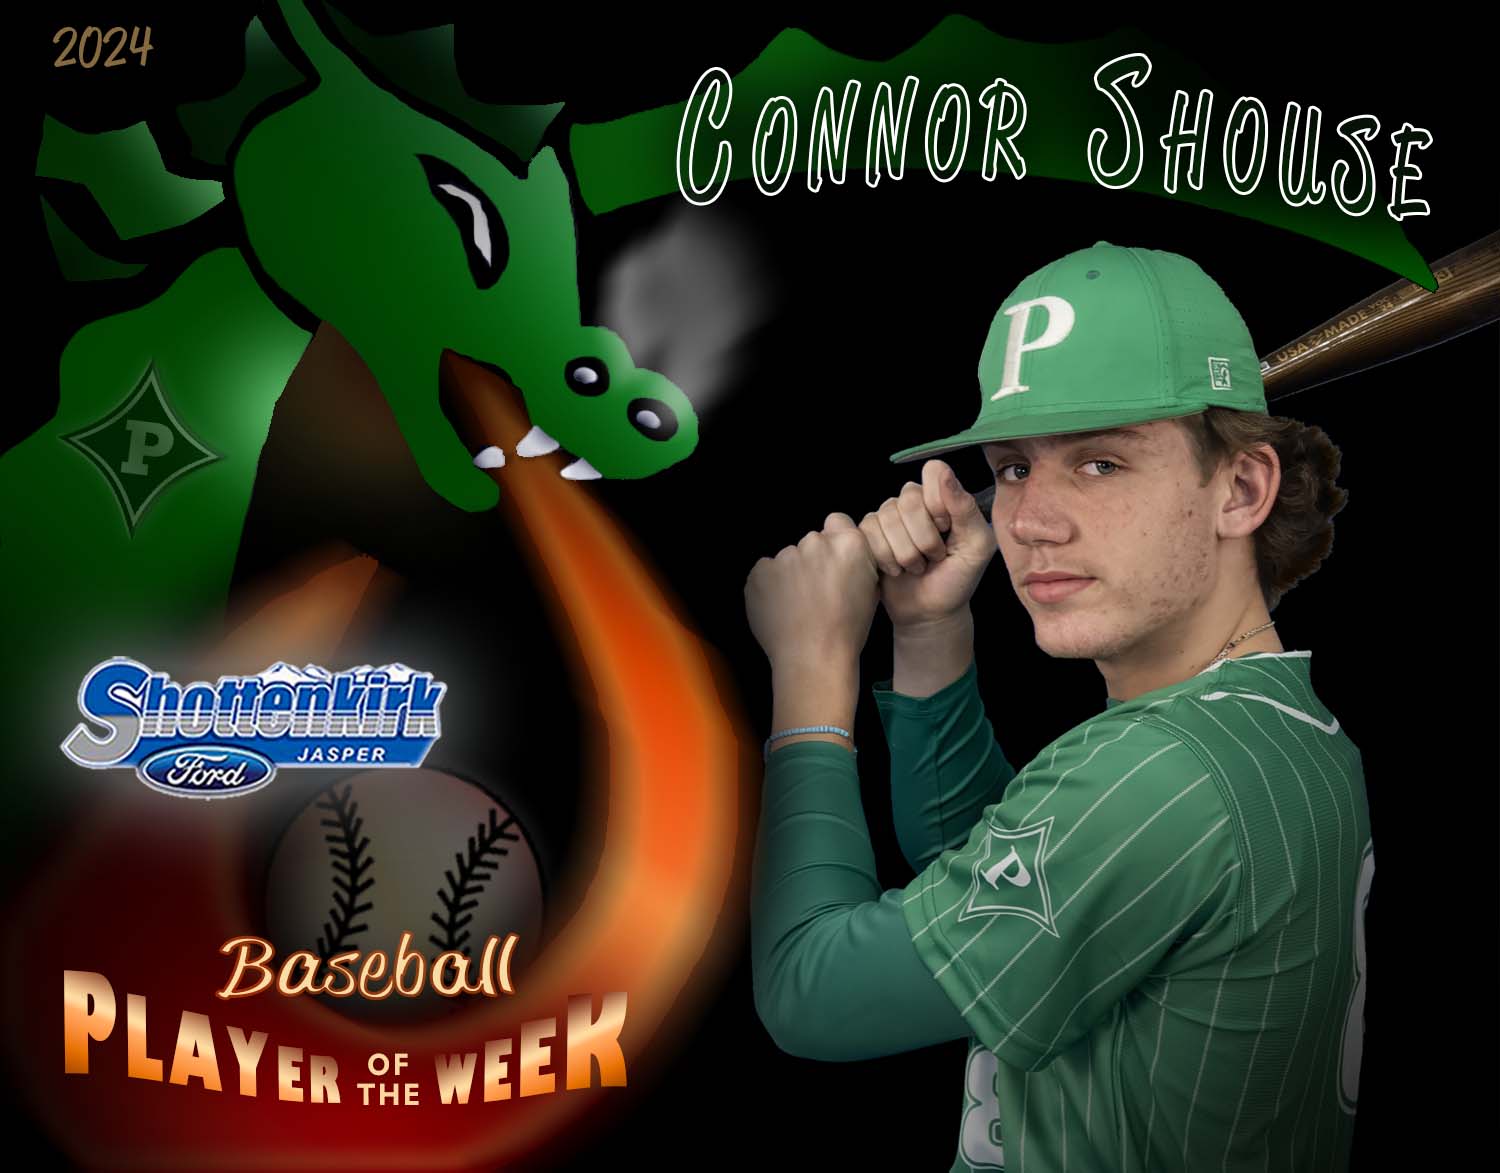 PHS Dragons Baseball Player of the Week #2 - Connor Shouse